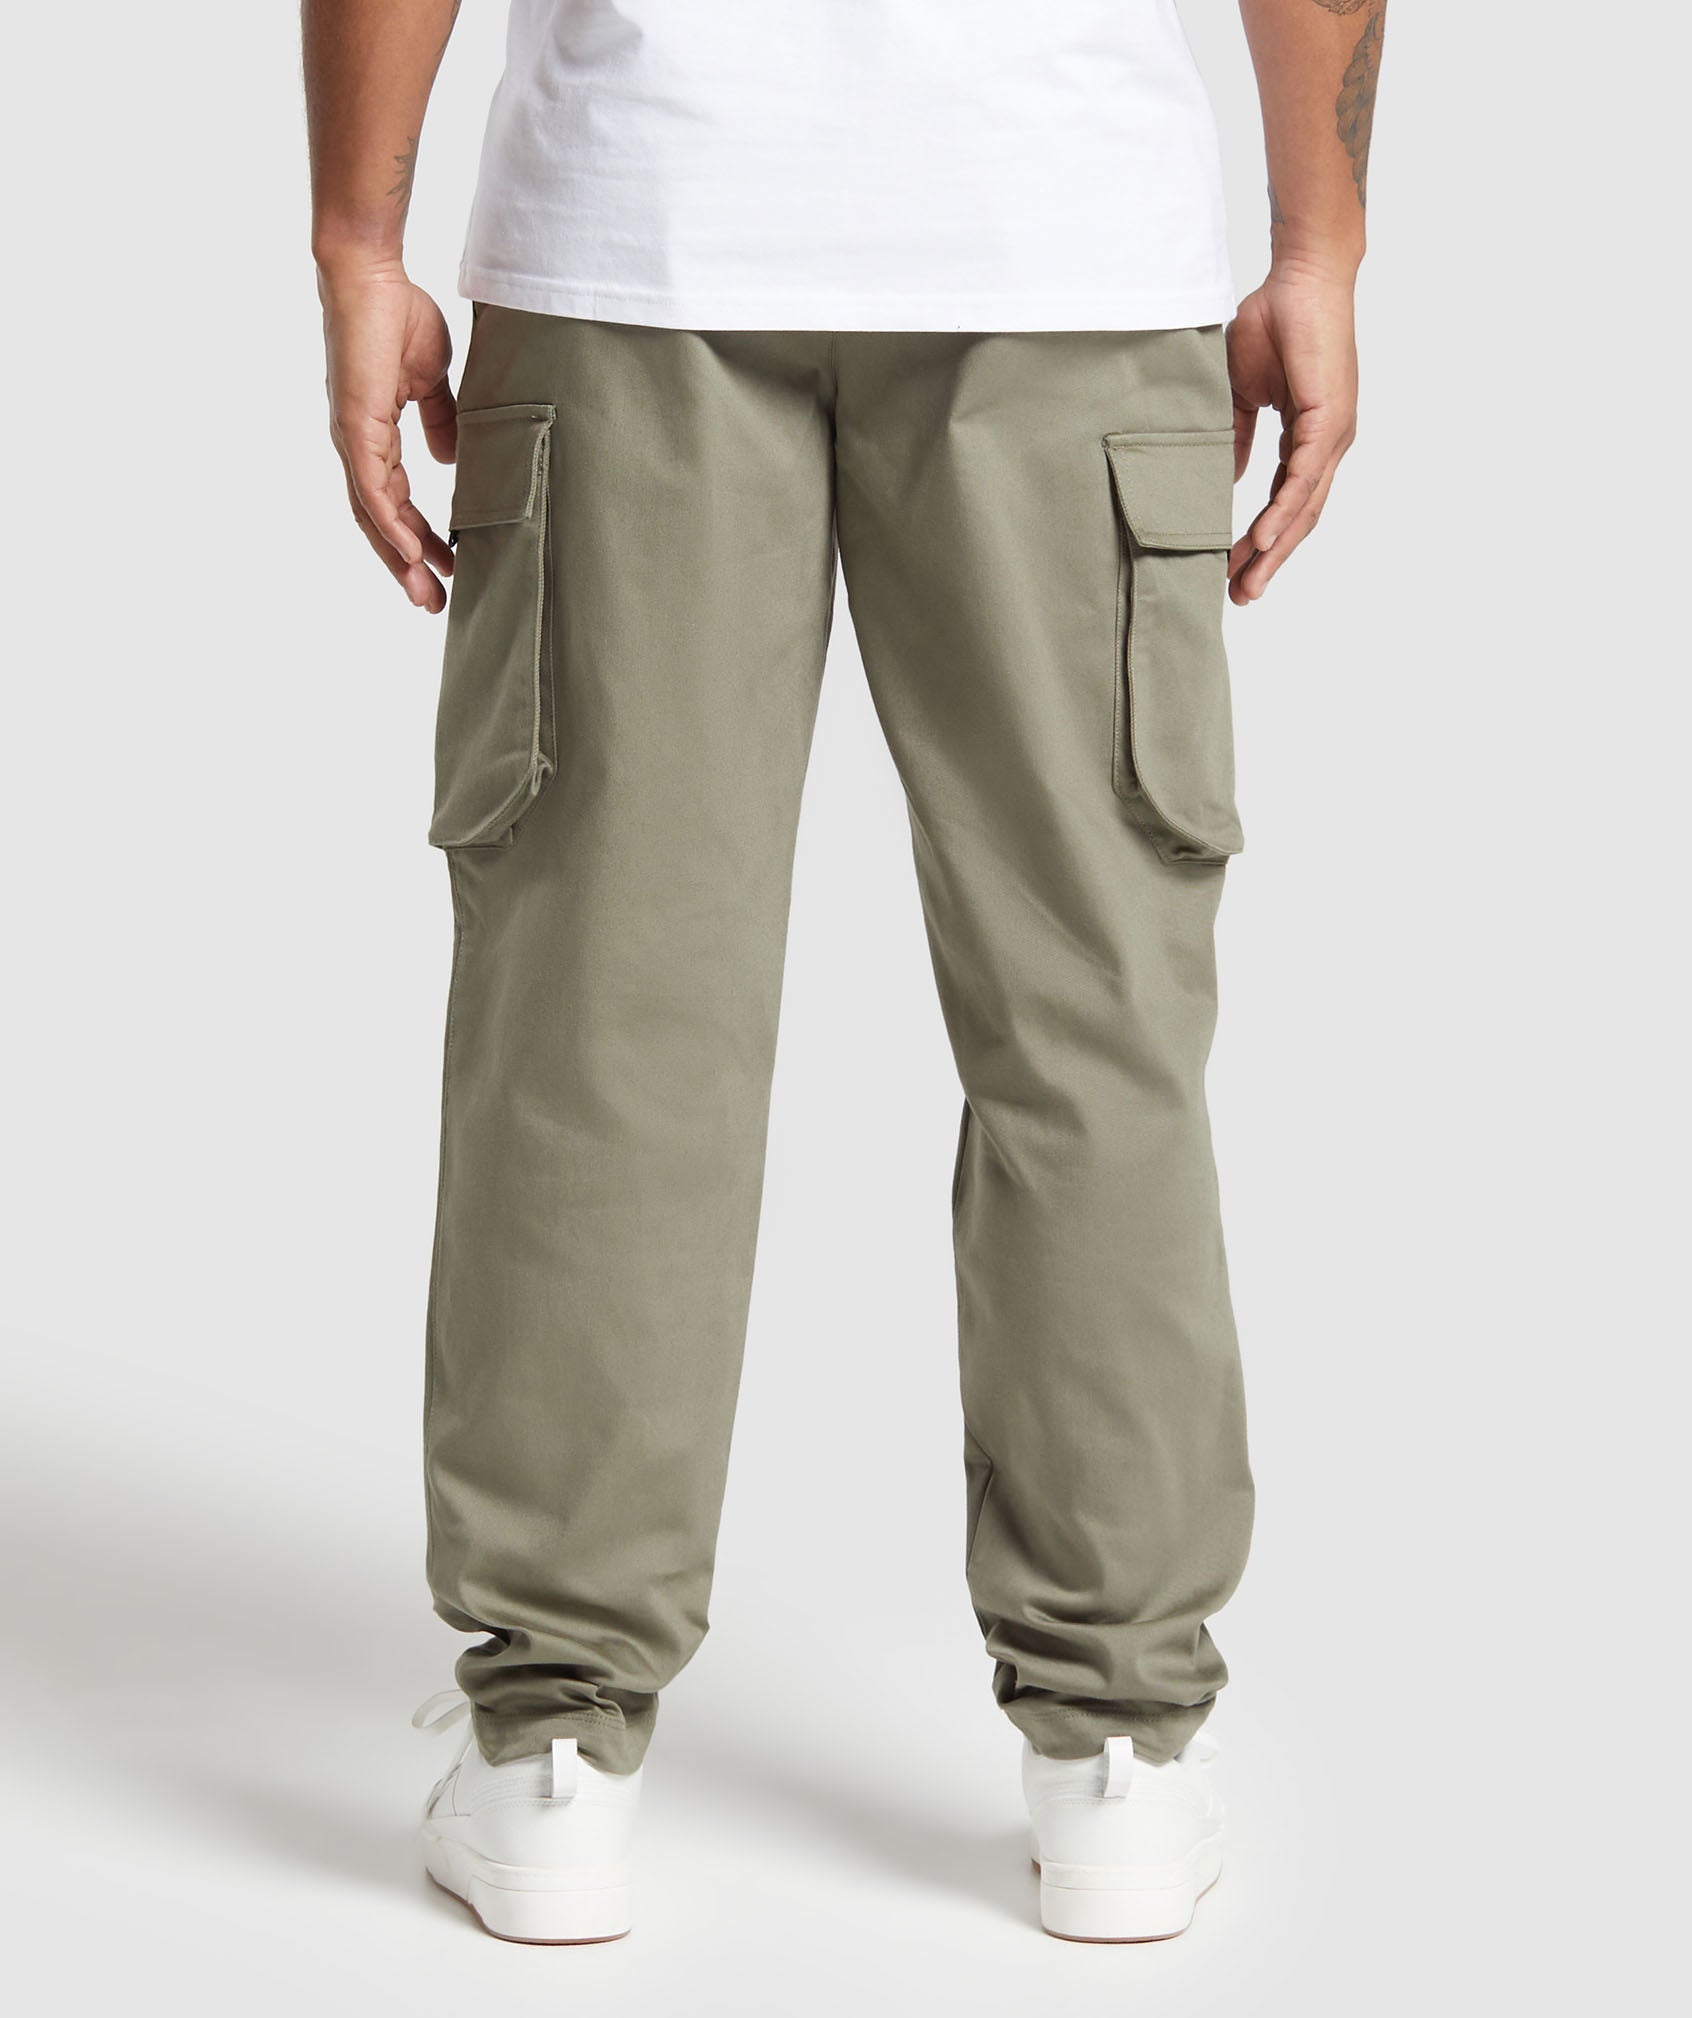 Rest Day Woven Cargo Pants in Utility Green - view 2